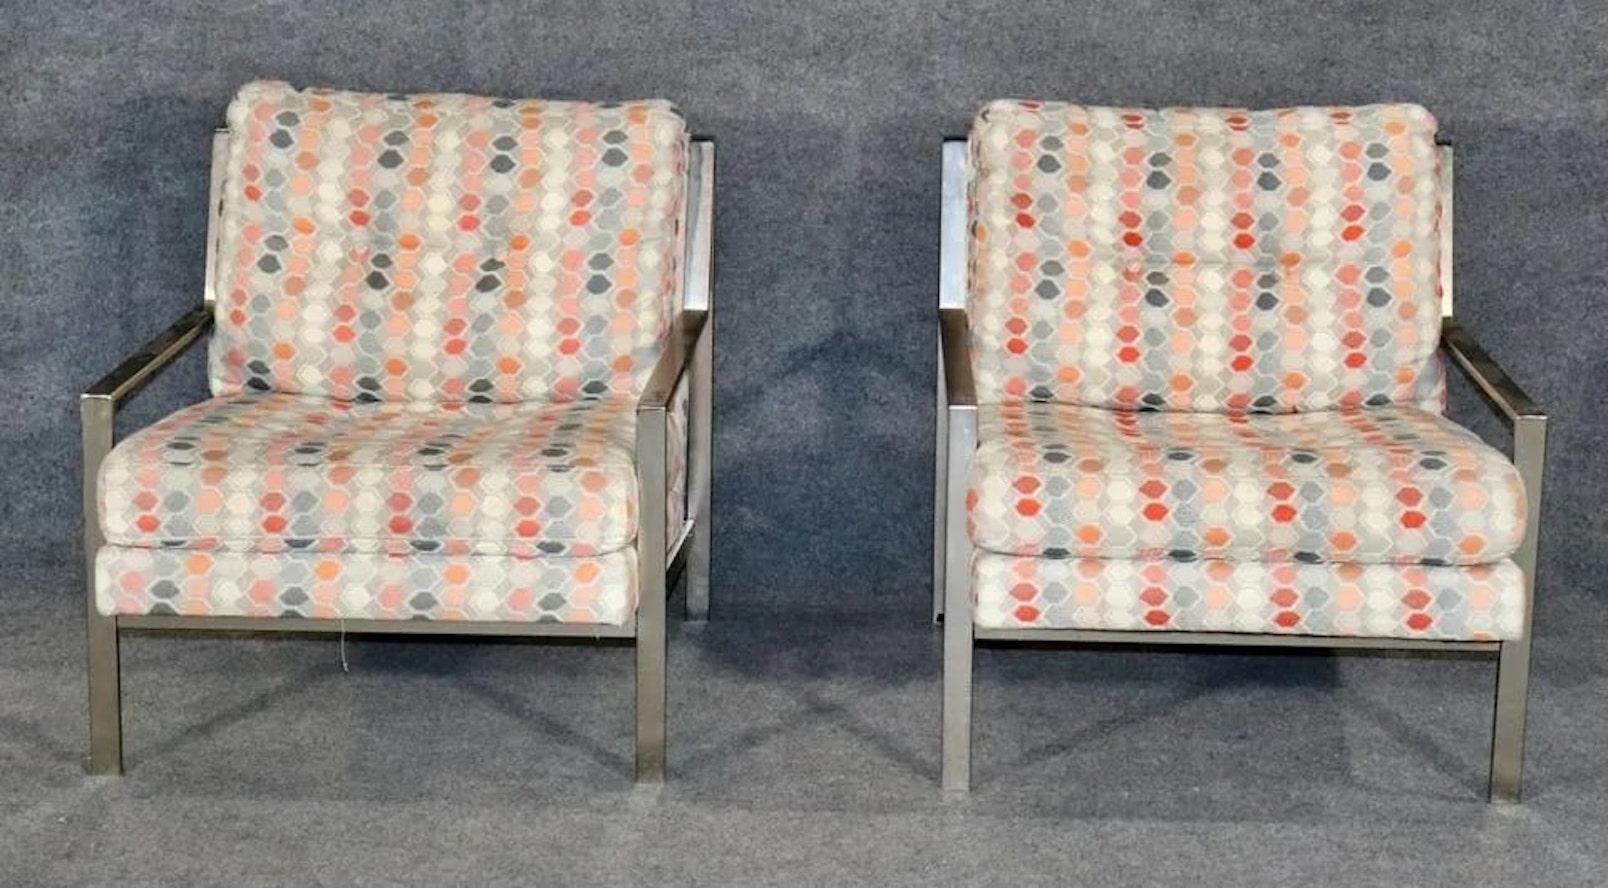 Pair of Mid-Century Modern cube chairs by Thayer Coggin. Designed by Milo Baughman with wide polished chrome bars that warp around and angle at the top. Great style and comfort for home or office.
Please confirm location NY or NJ.